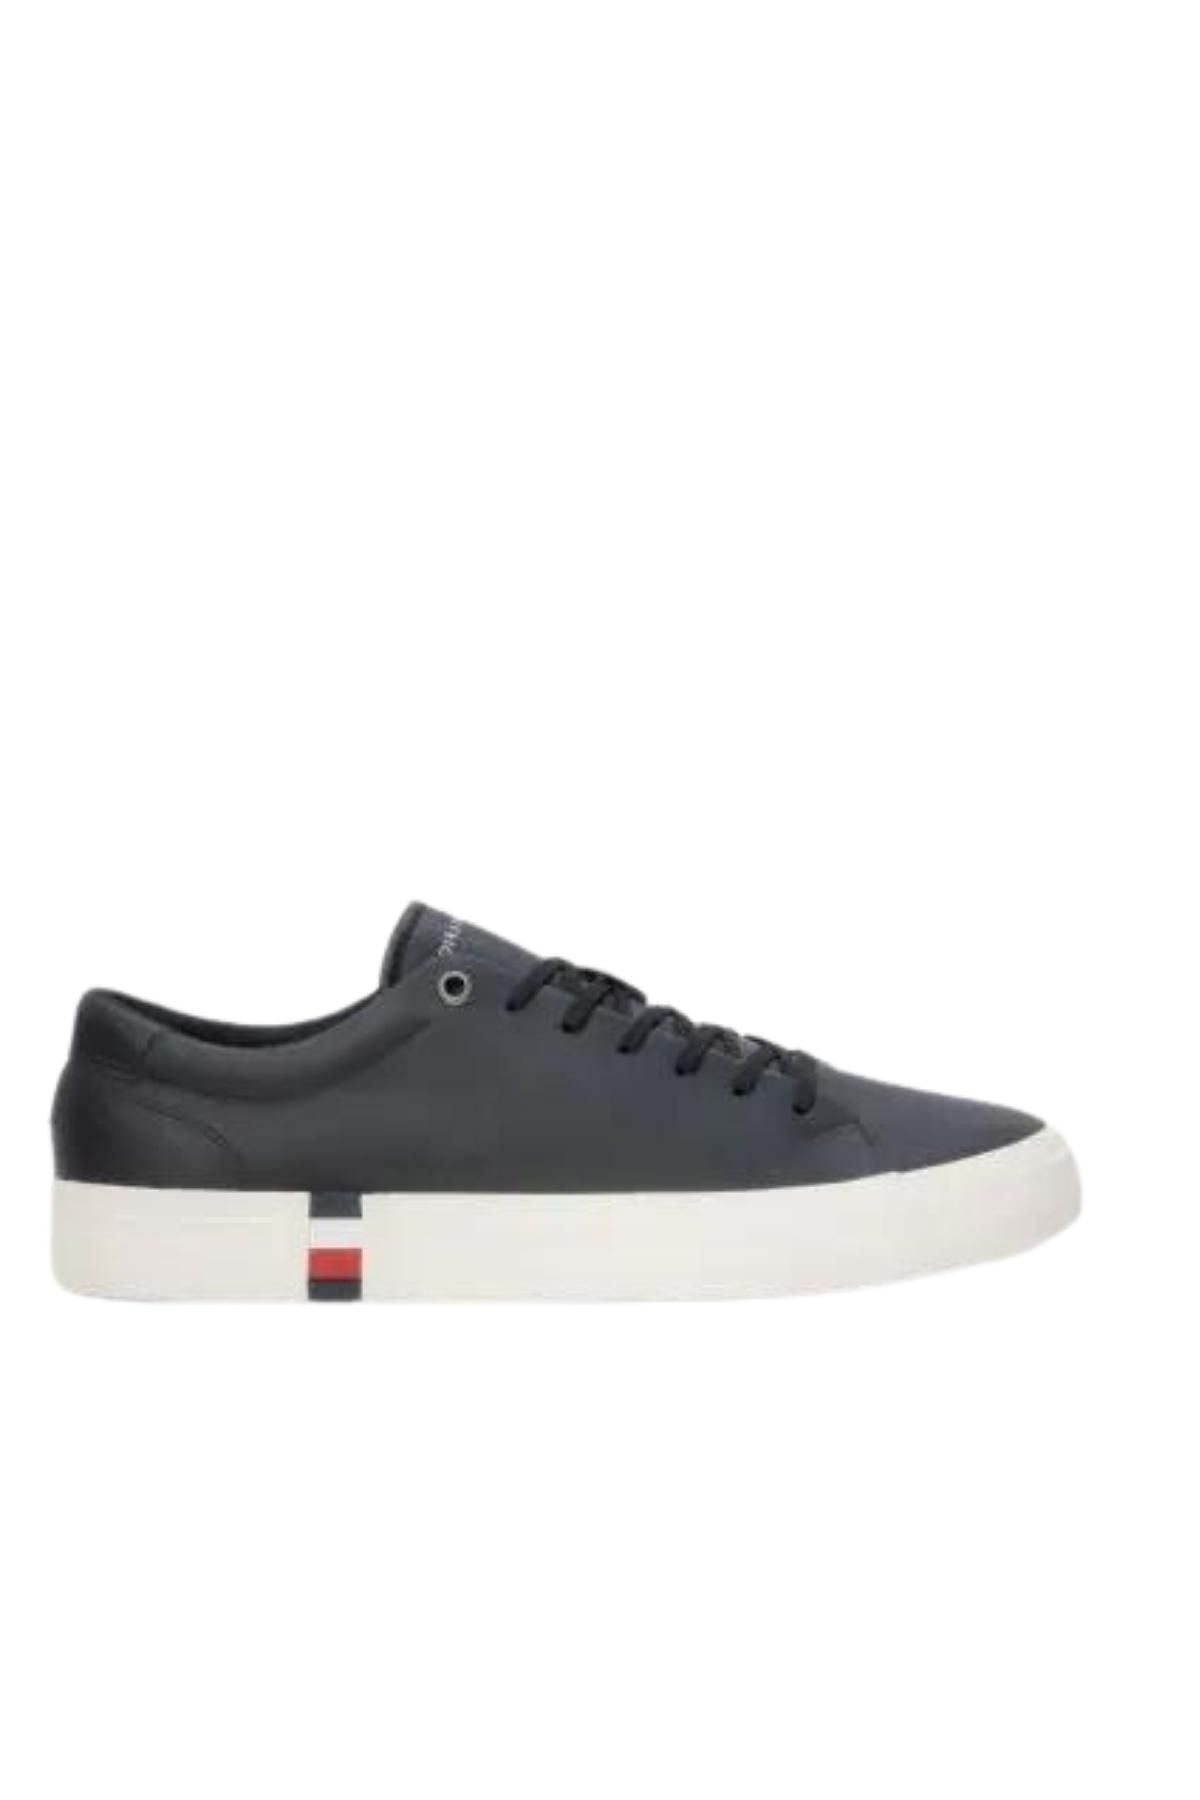 Tommy Hilfiger Corporate Leather Detail Vulc